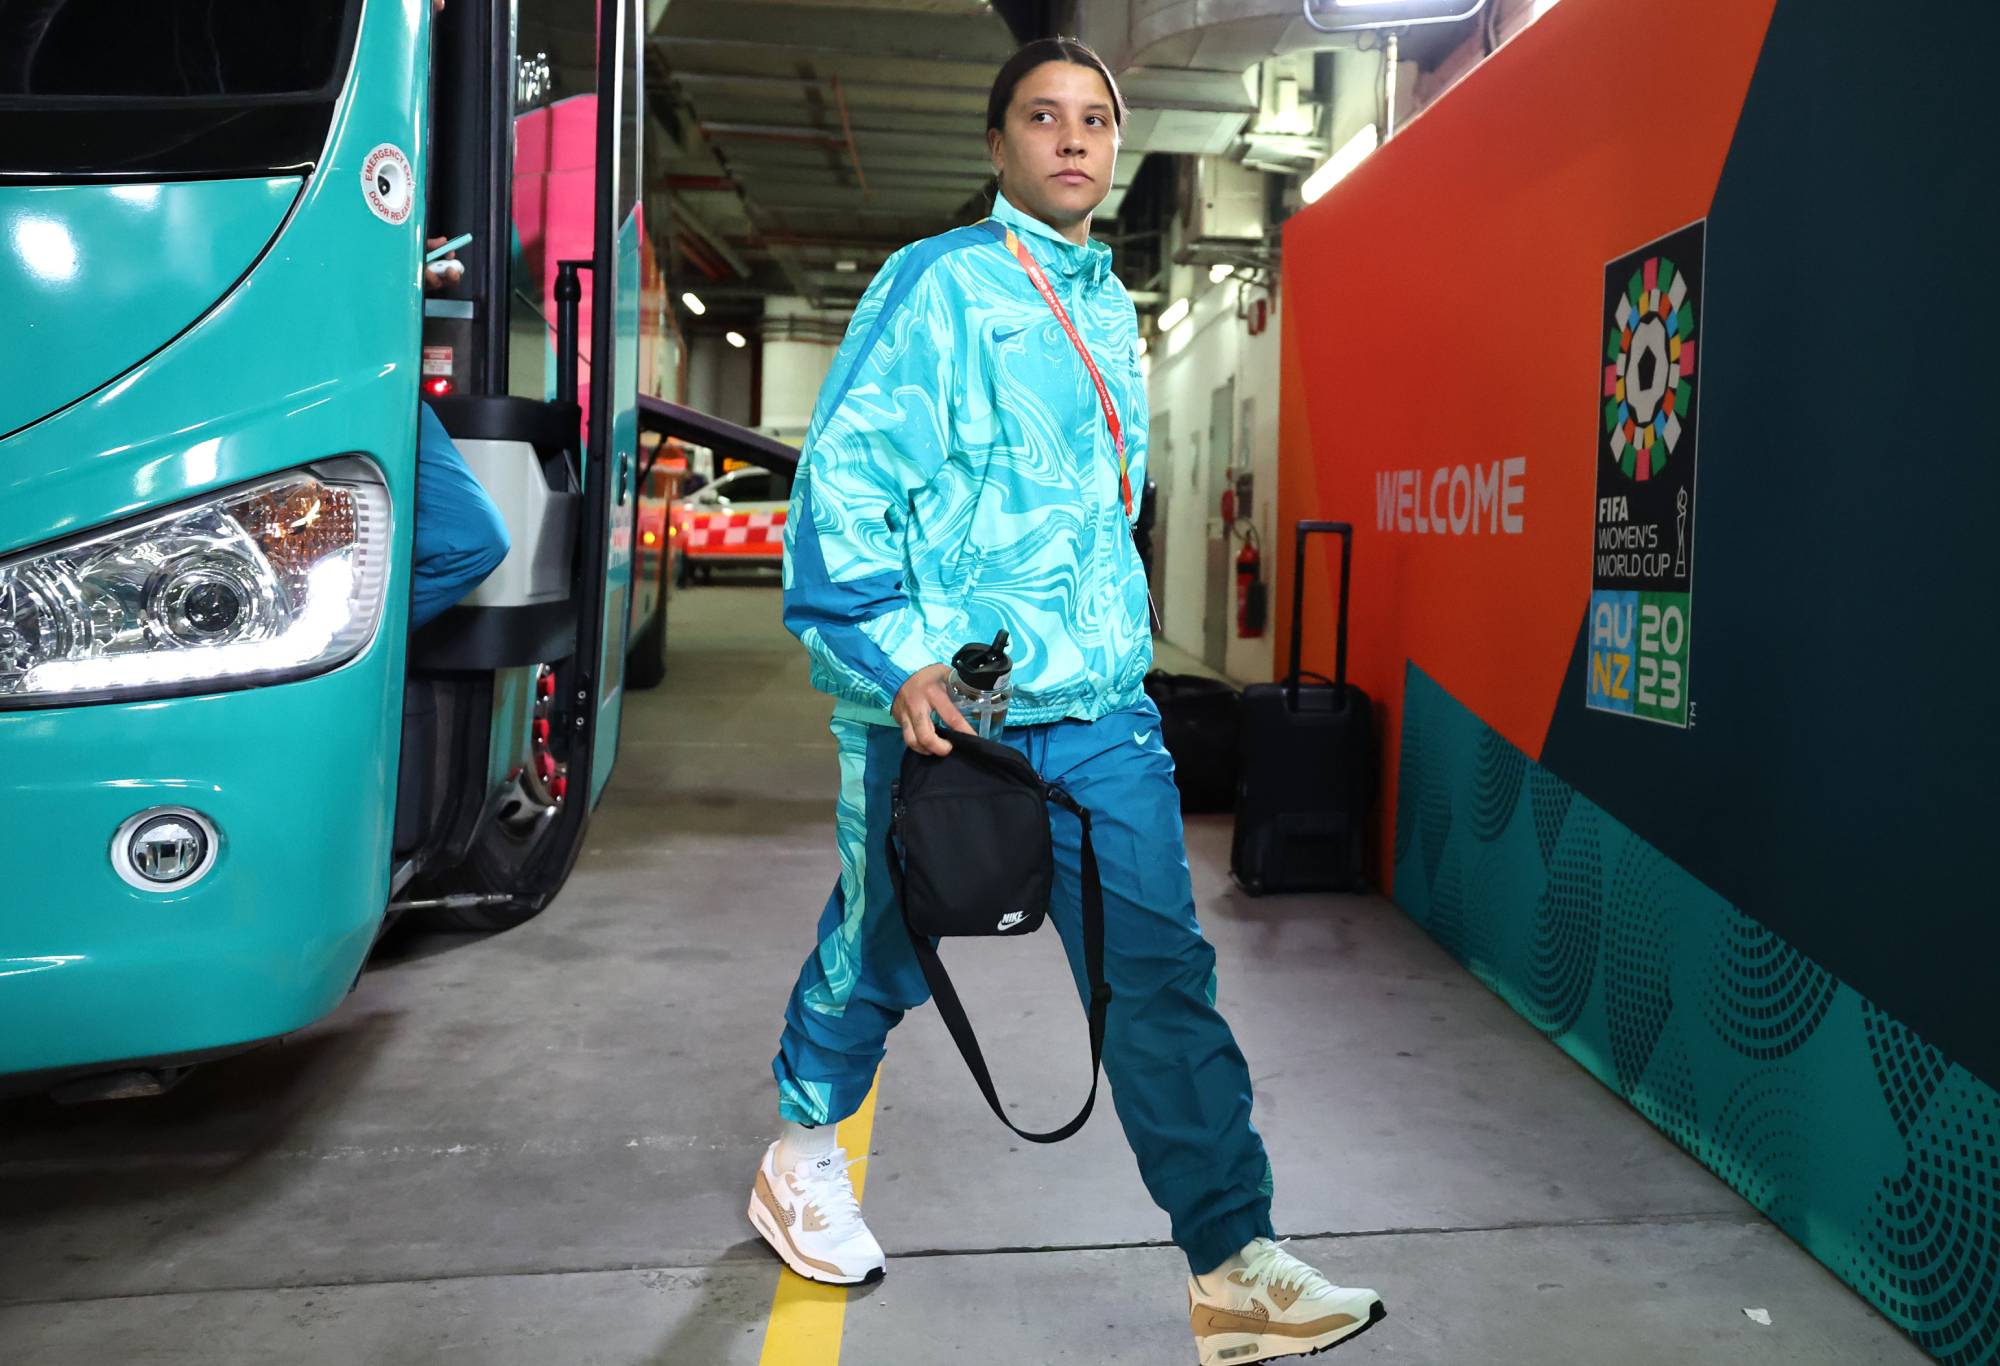 Sam Kerr of Australia arrives at the stadium prior to the FIFA Women's World Cup Australia & New Zealand 2023 Group B match between Australia and Ireland at Stadium Australia on July 20, 2023 in Sydney / Gadigal , Australia. (Photo by Maddie Meyer - FIFA/FIFA via Getty Images)